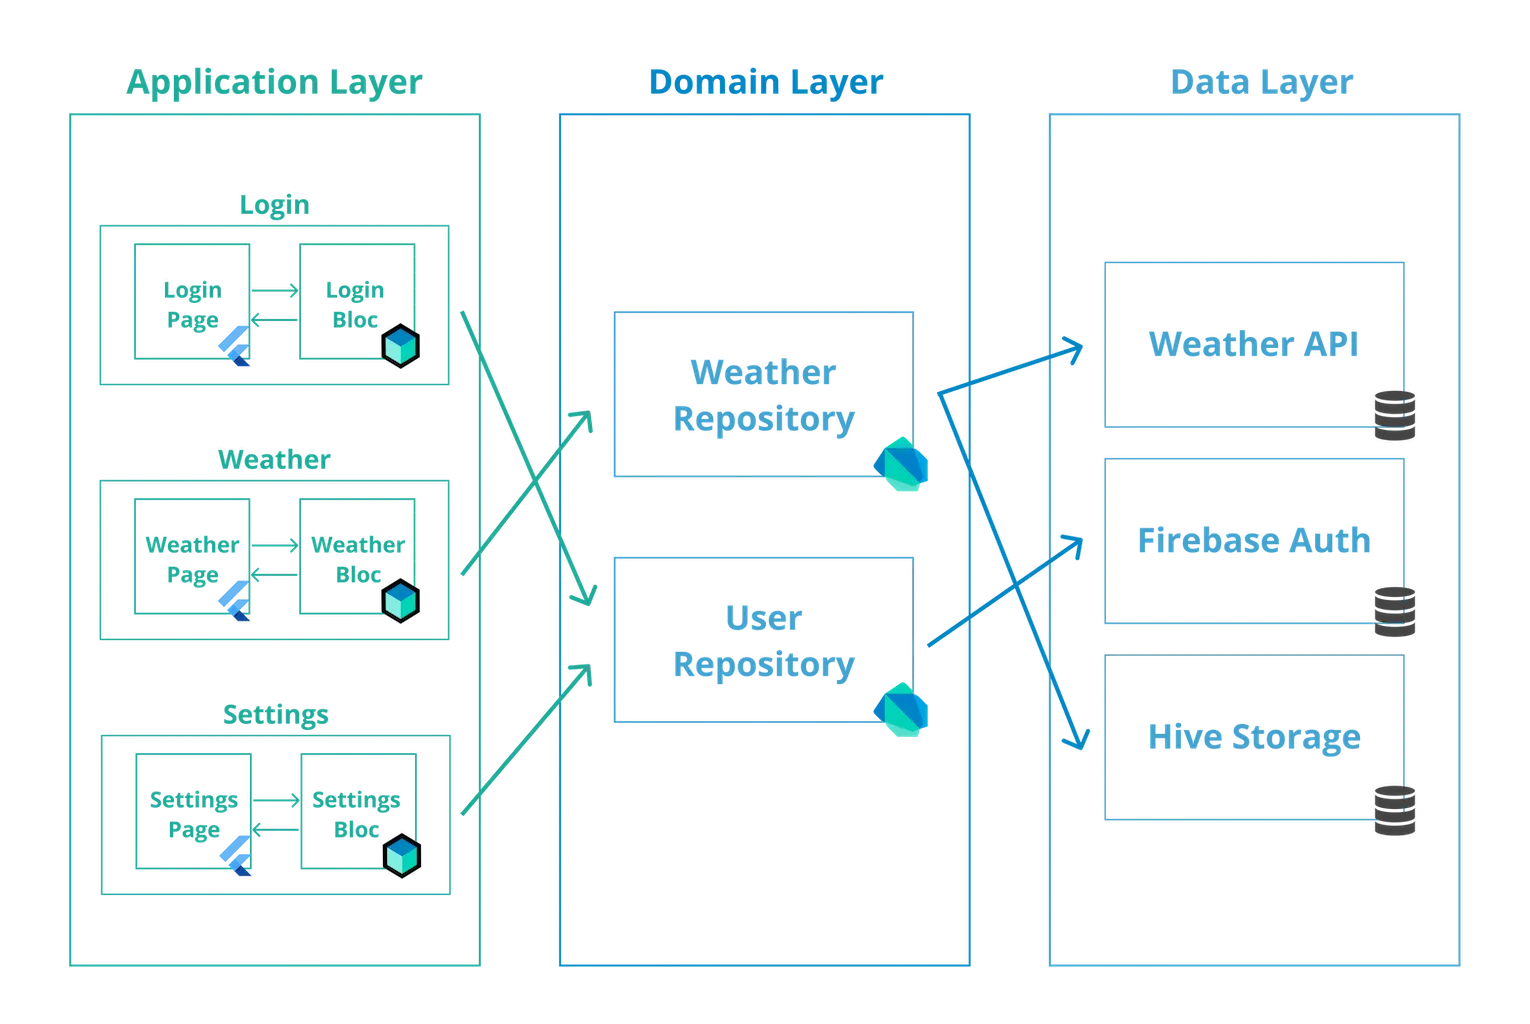 Application Architecture Layers